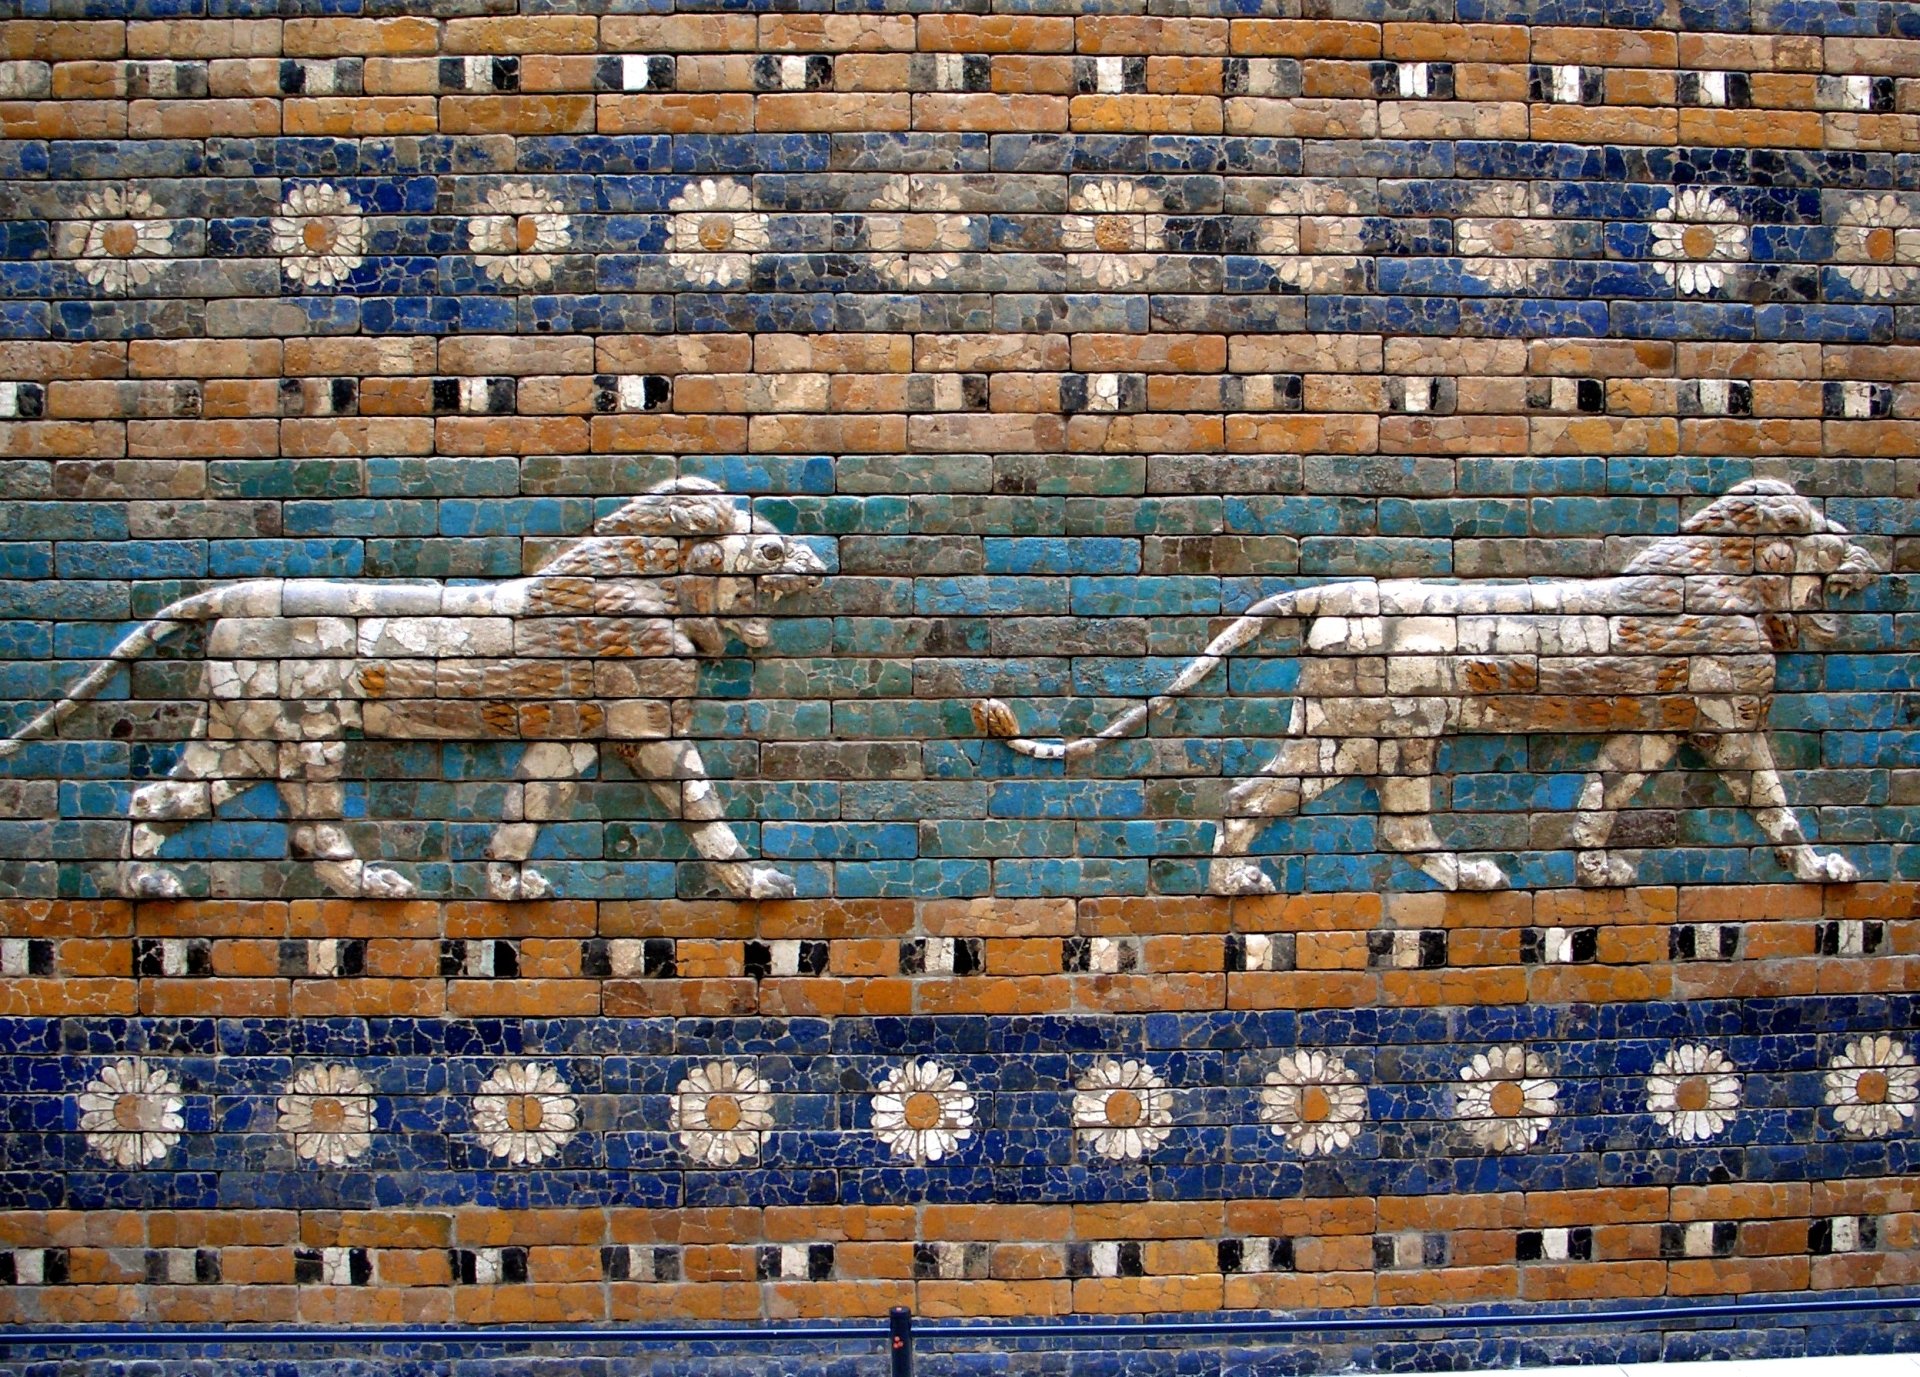 Ishtar Gate Wallpapers